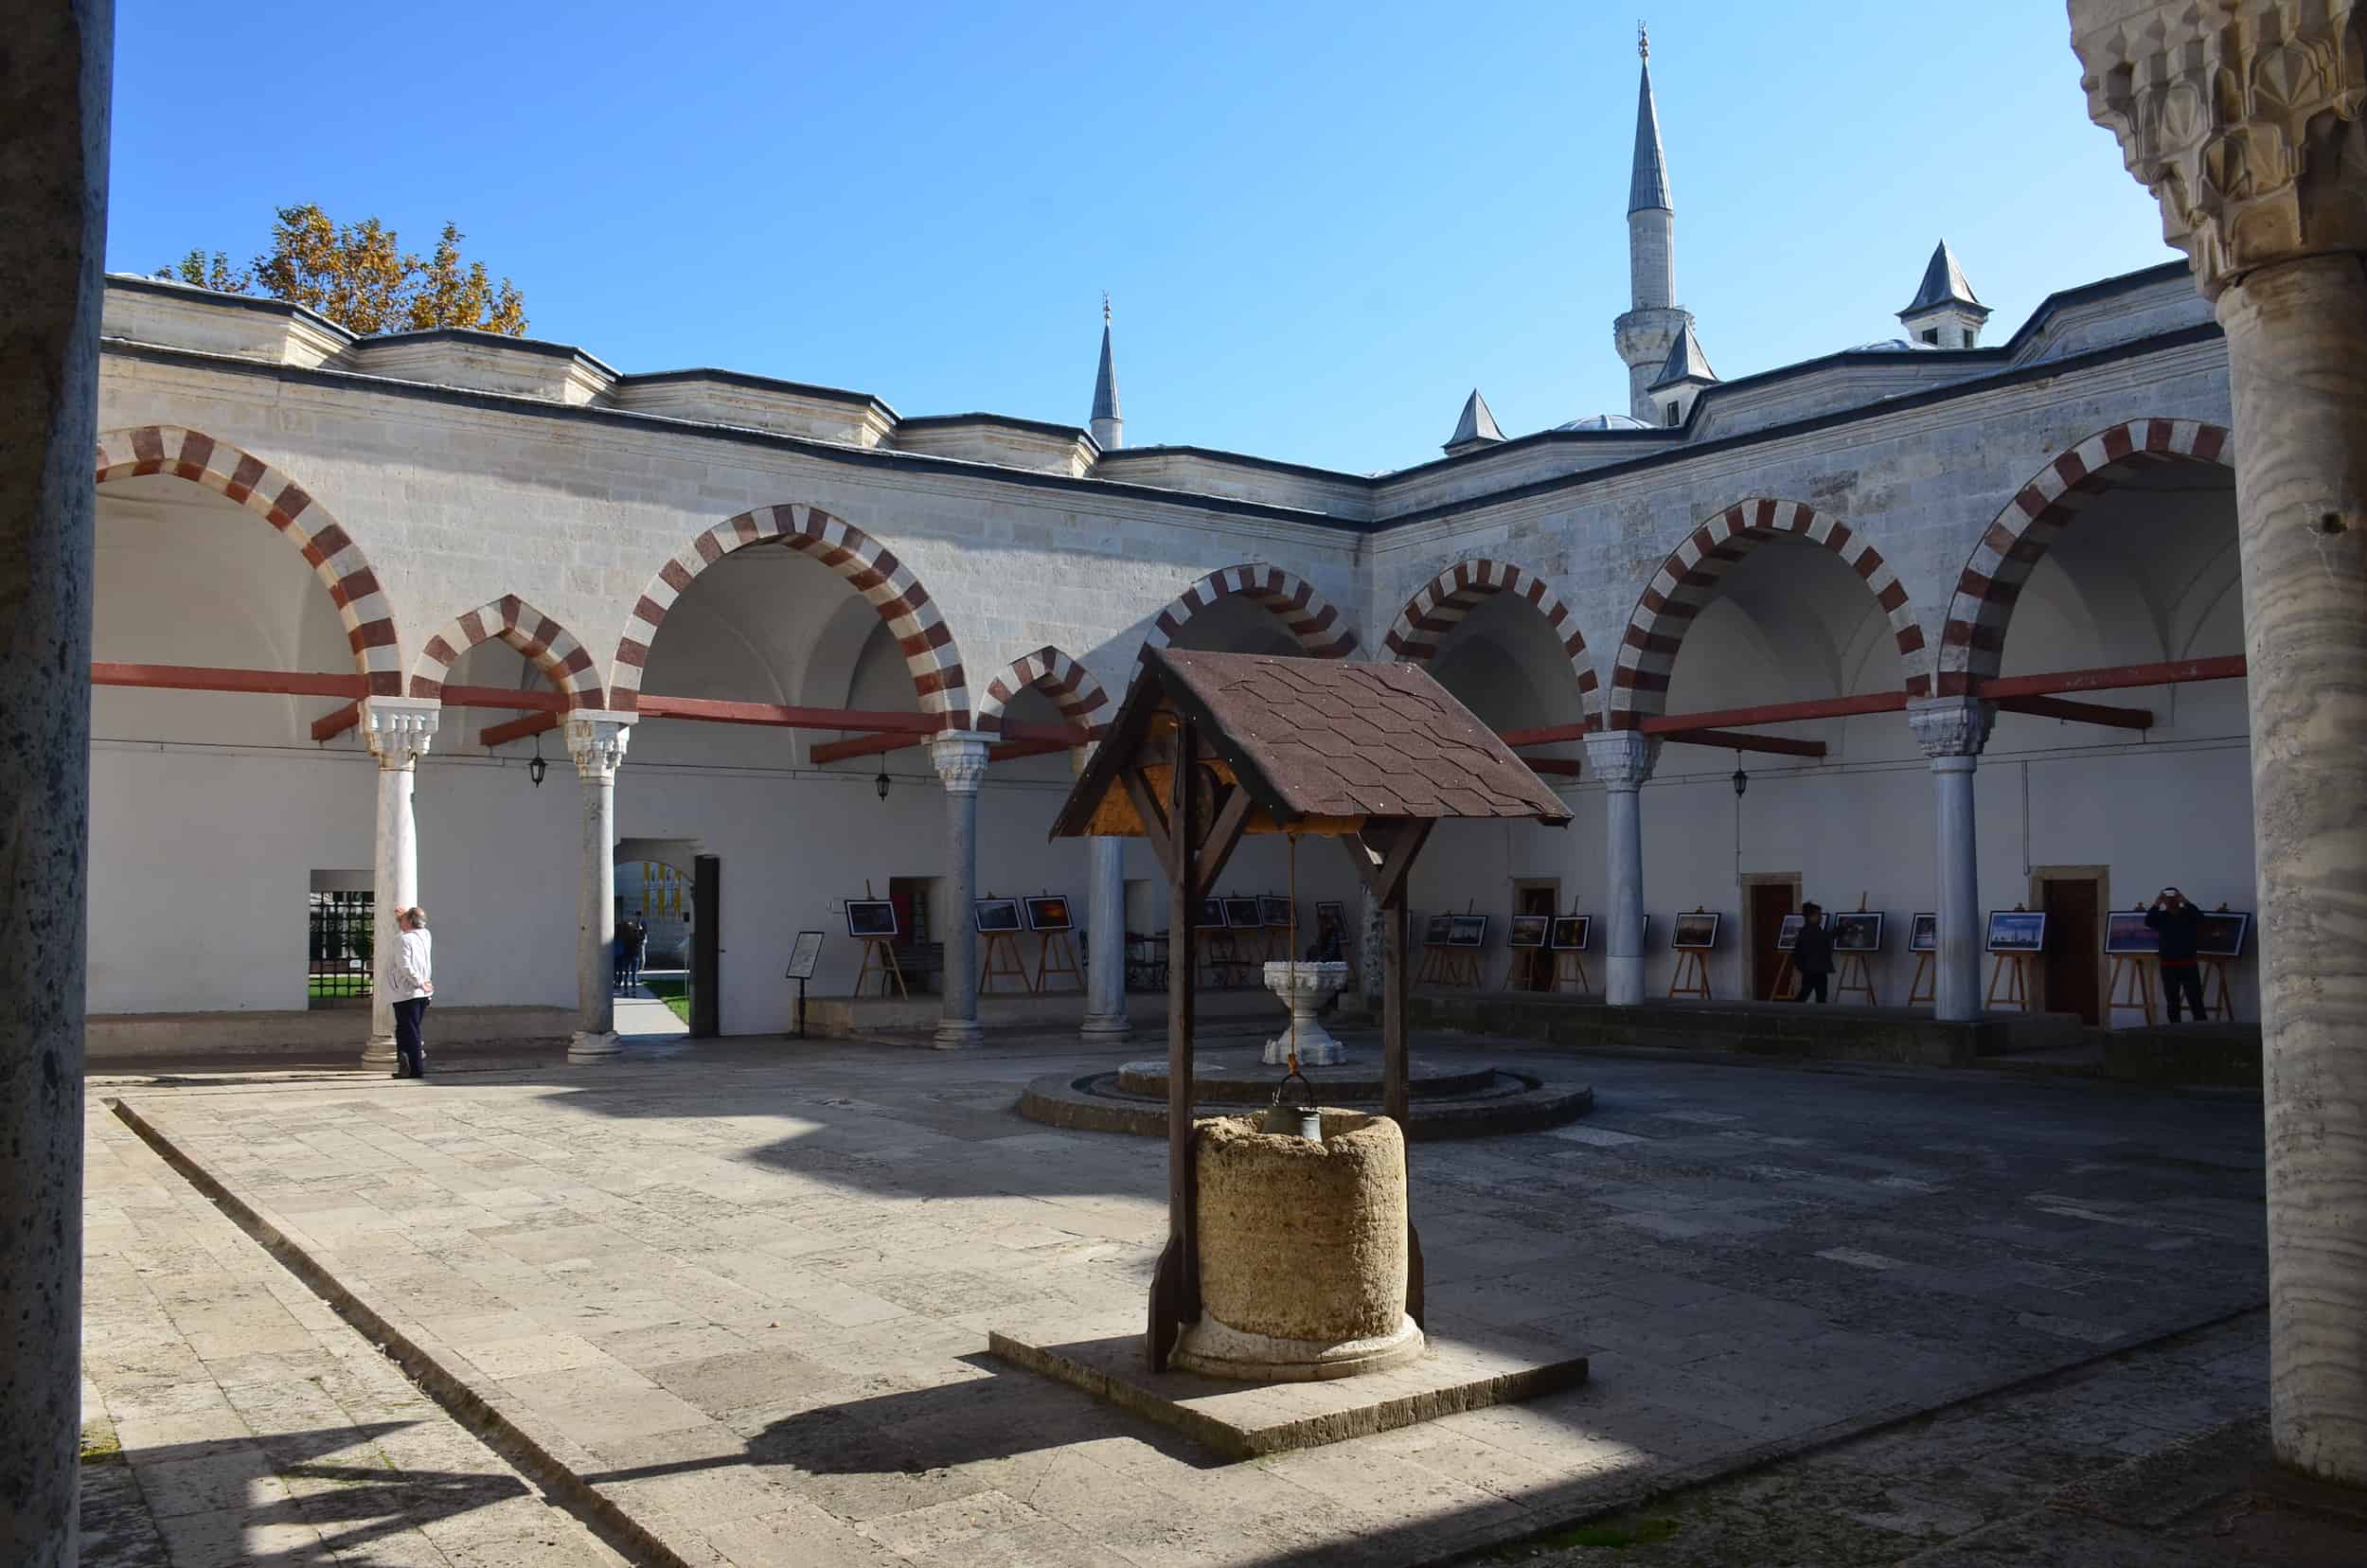 Courtyard of the Bayezid II Medical School at the Complex of Bayezid II Health Museum in Edirne, Turkey